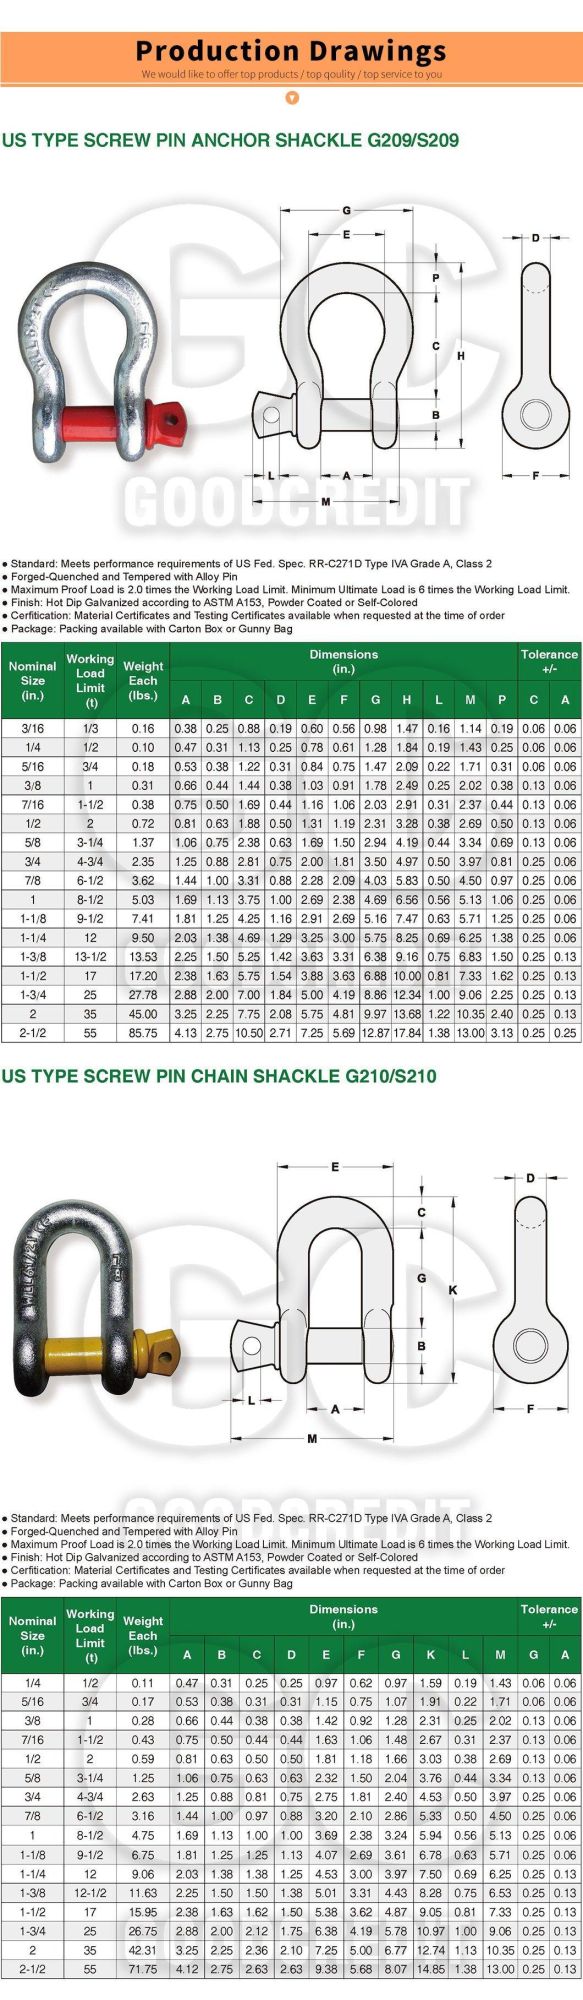 D Shape Shackle From Qingdao, China Quality Assurance and Good Price